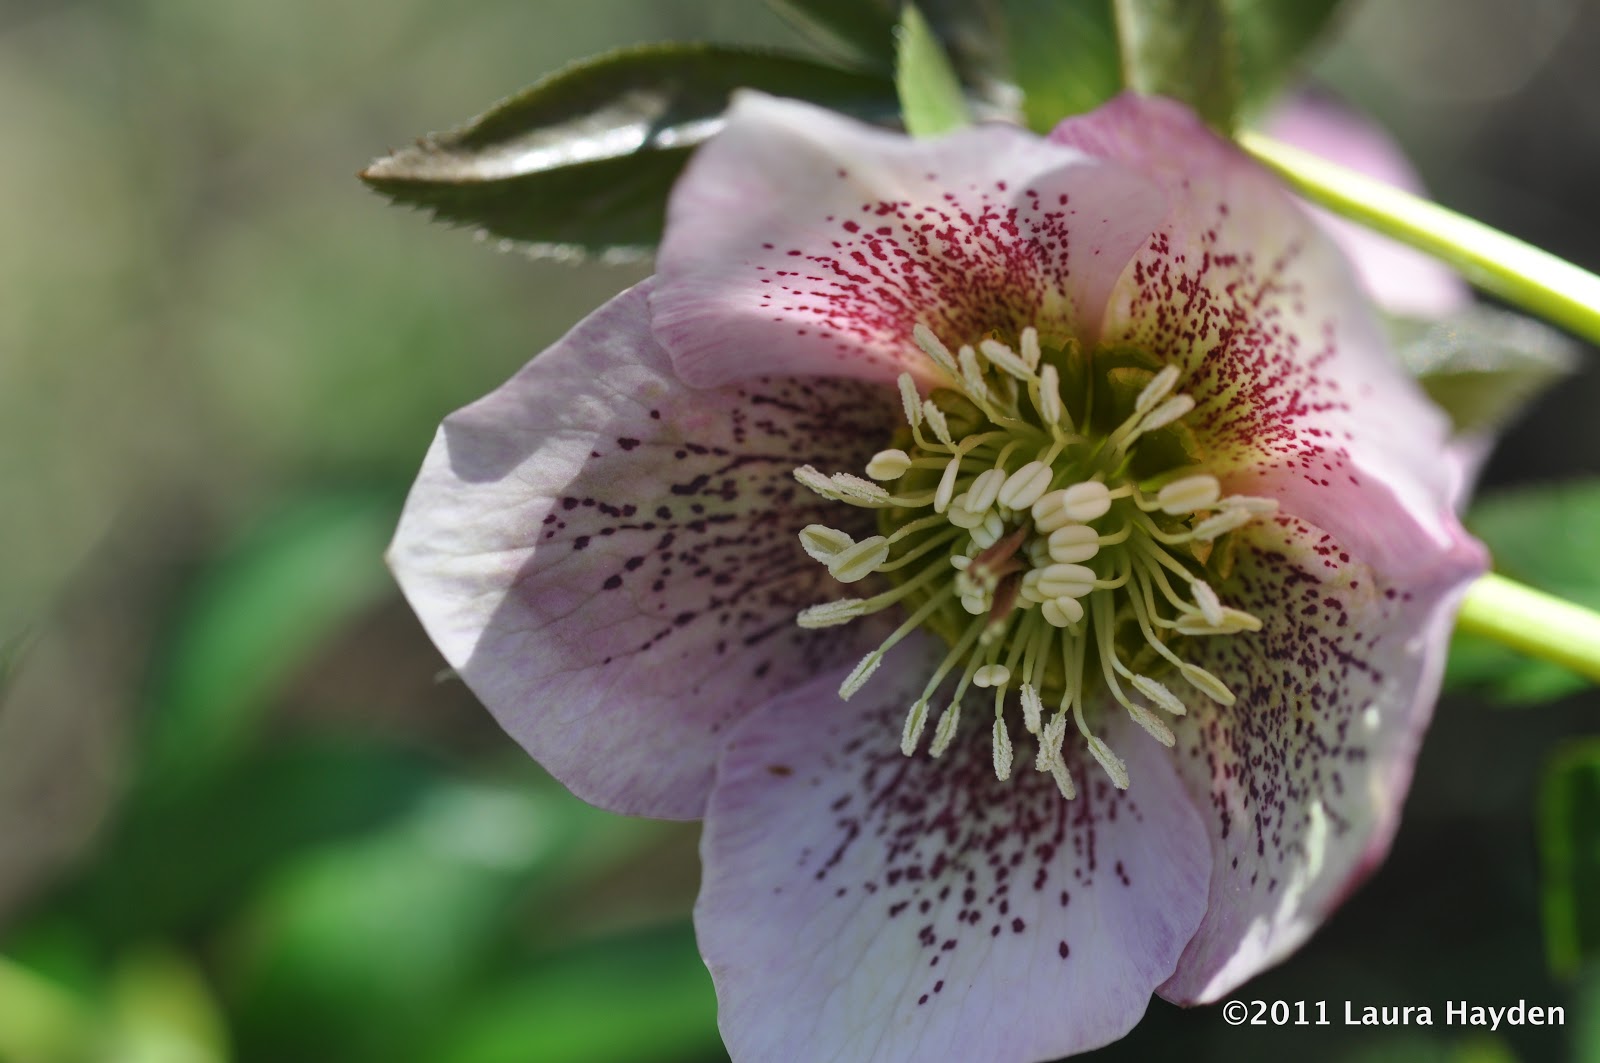 joint hellebore